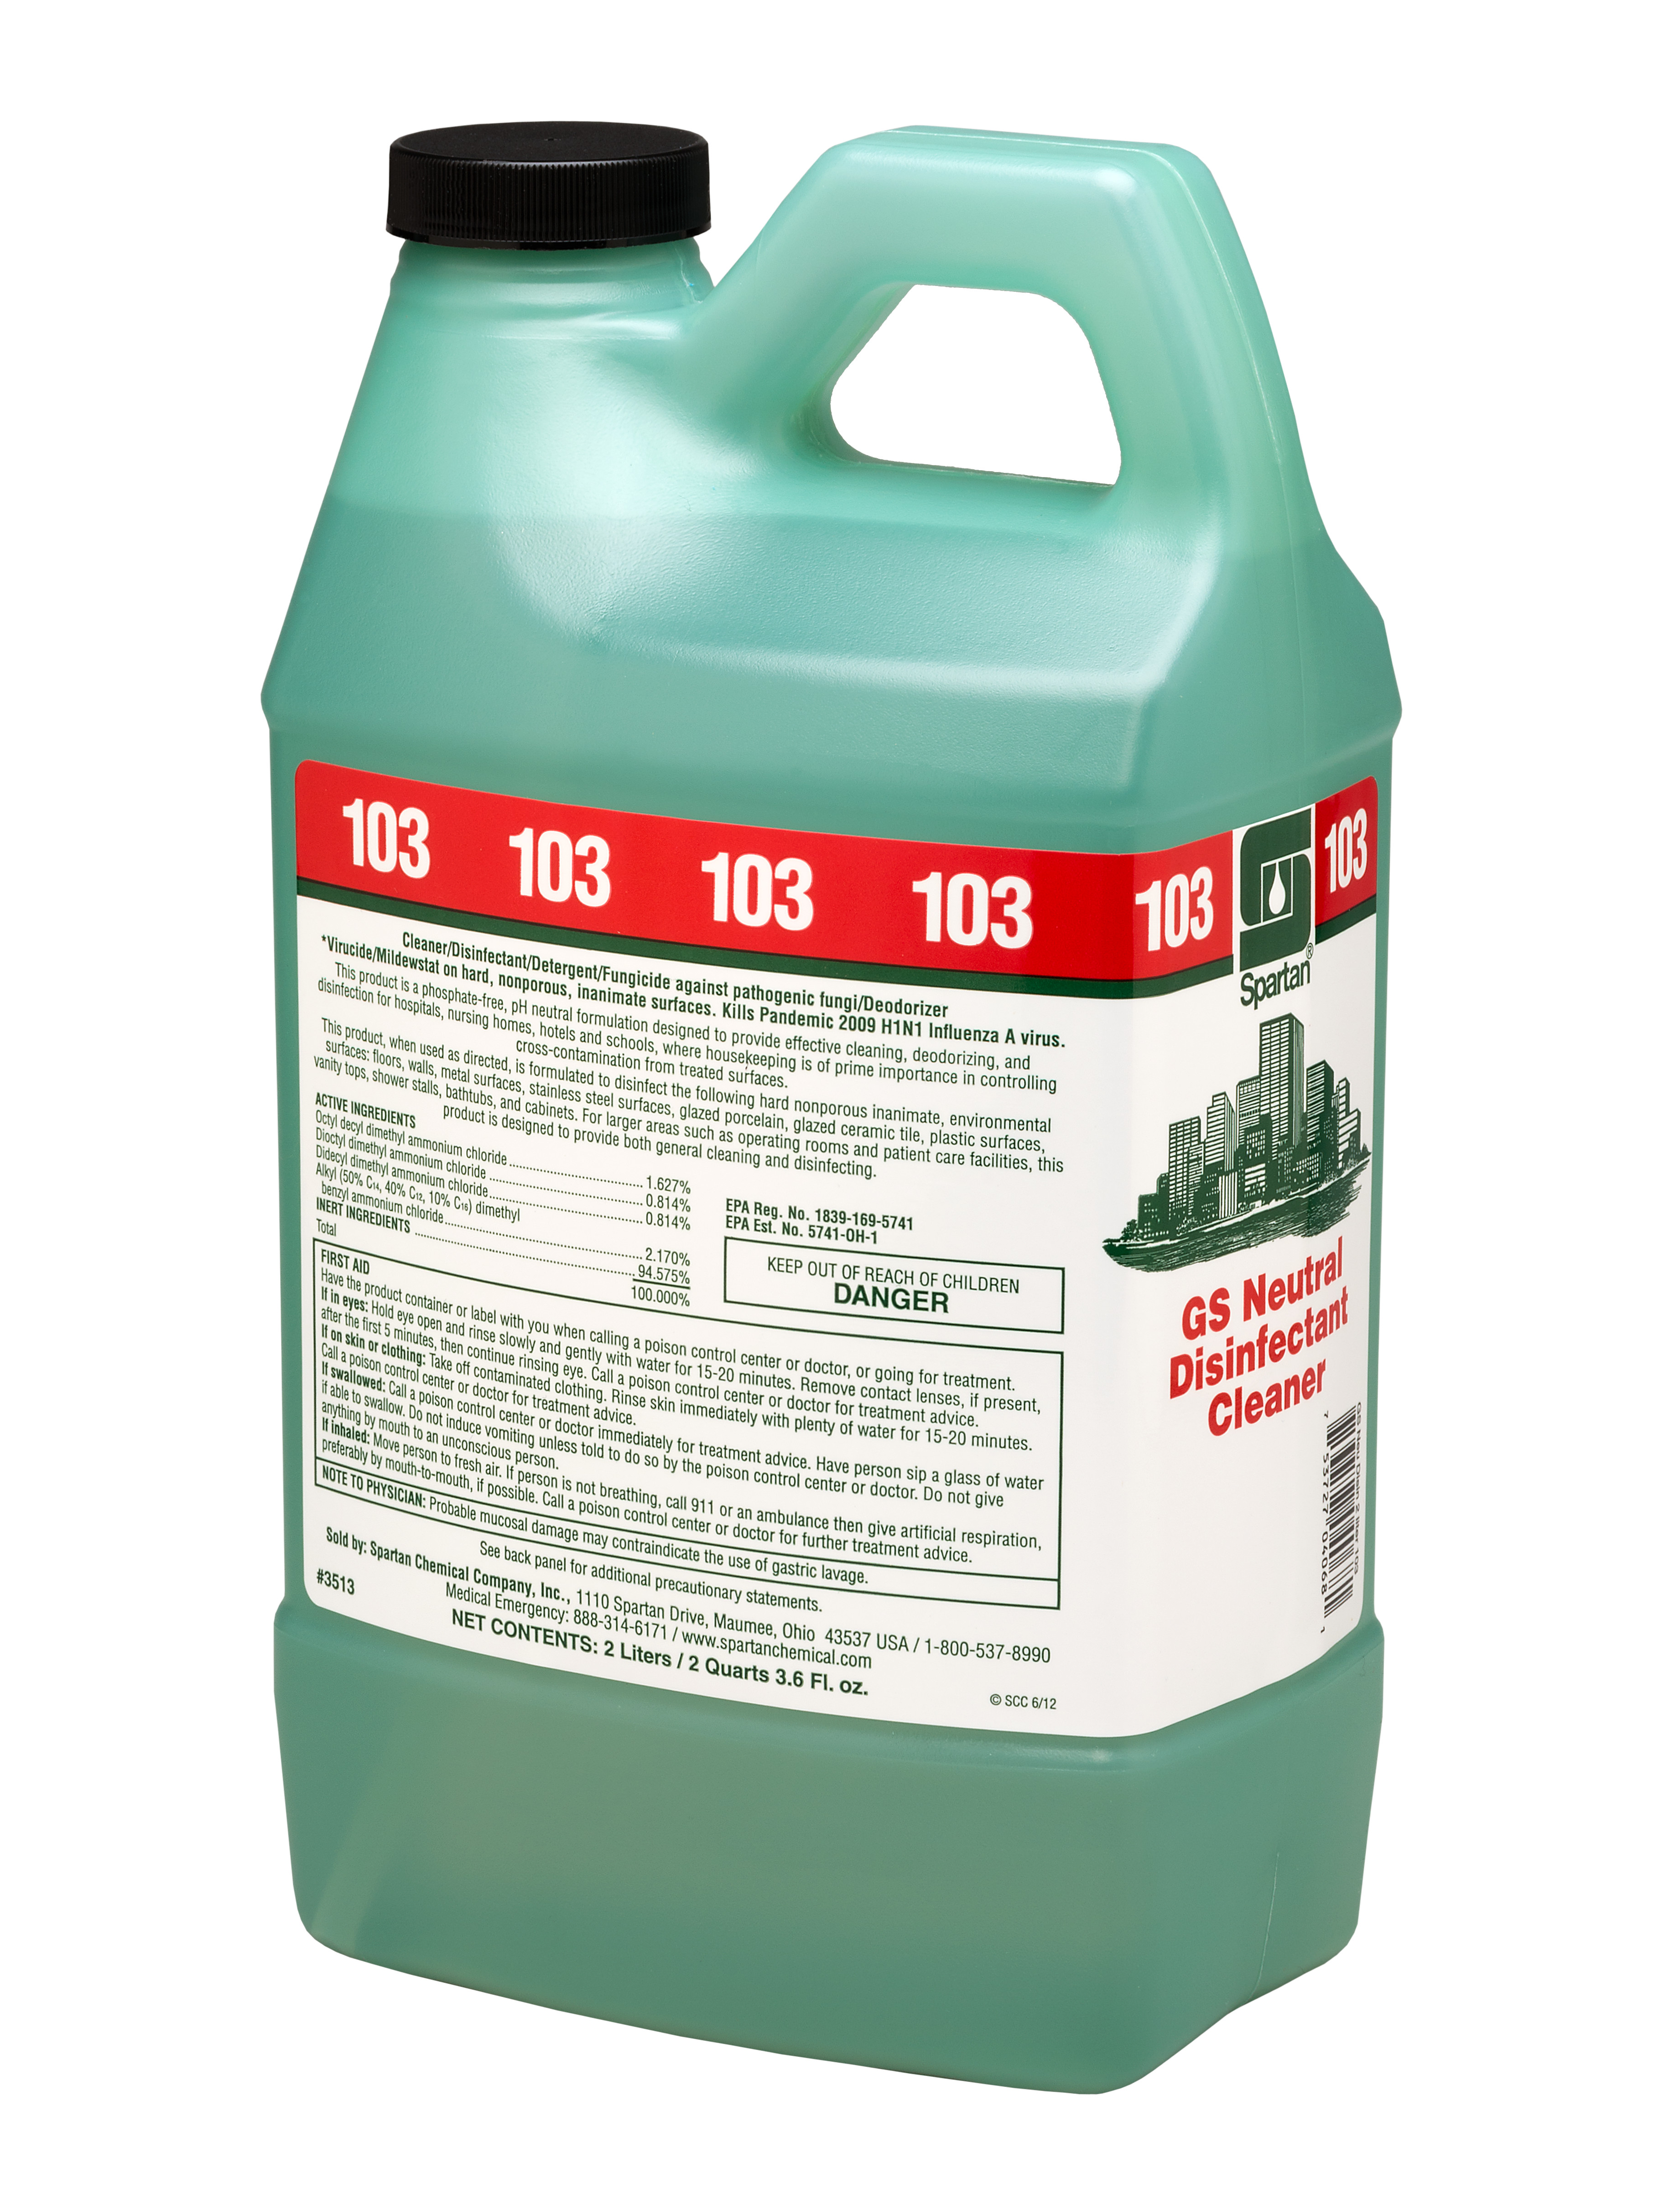 Spartan Chemical Company GS Neutral Disinfectant Cleaner 103, 2 Liter